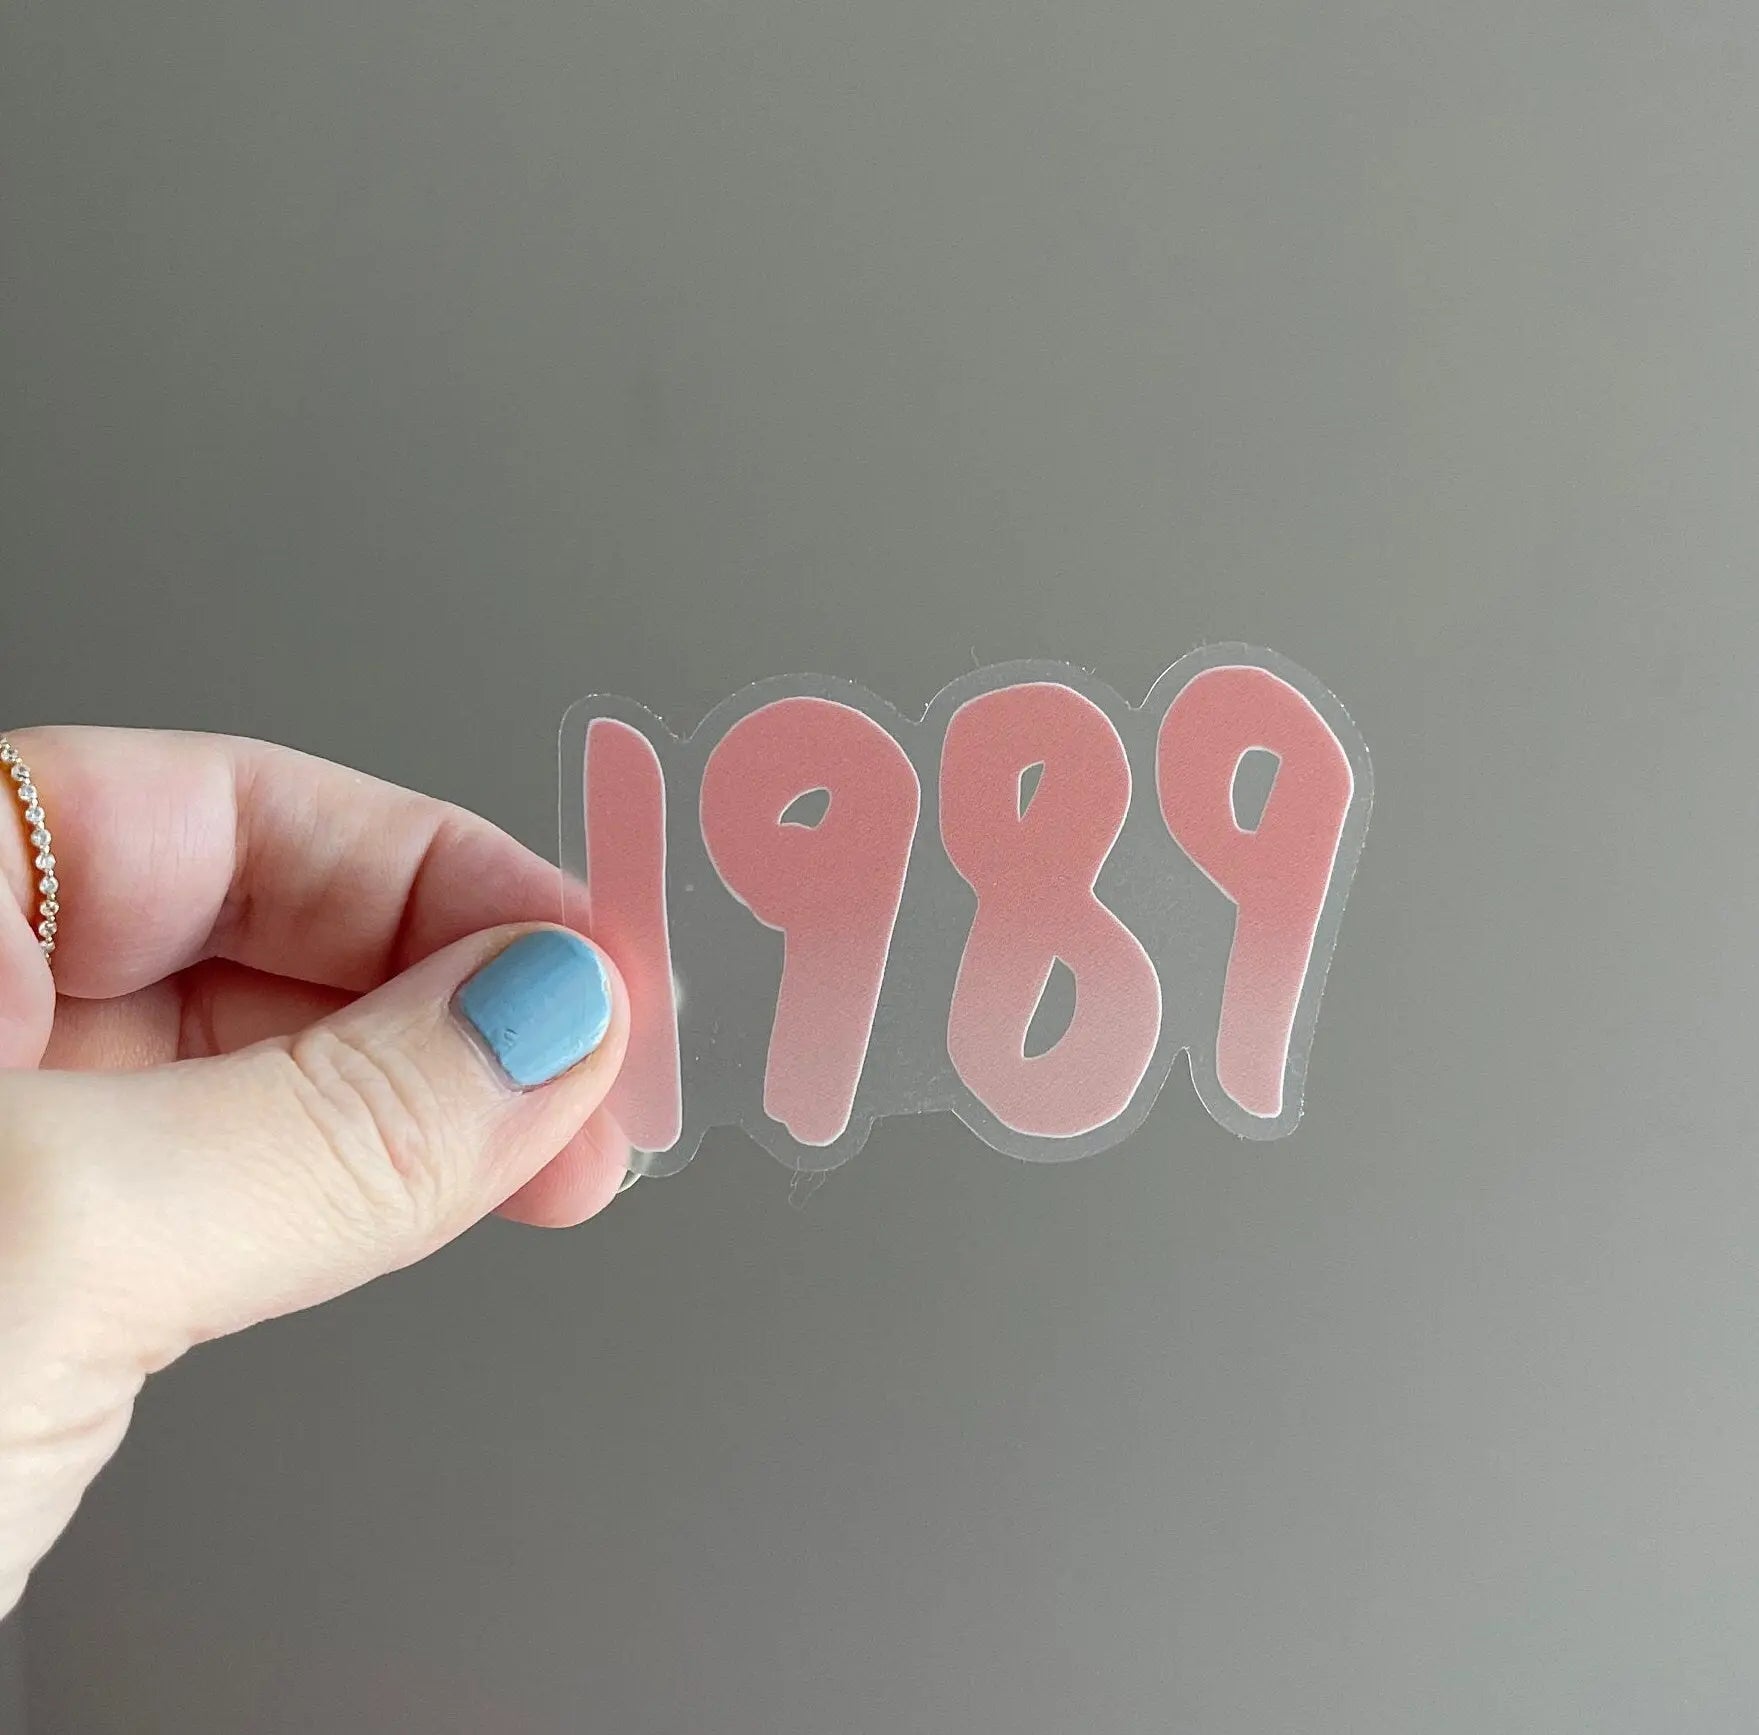 CLEAR 1989 sticker - pink MangoIllustrated